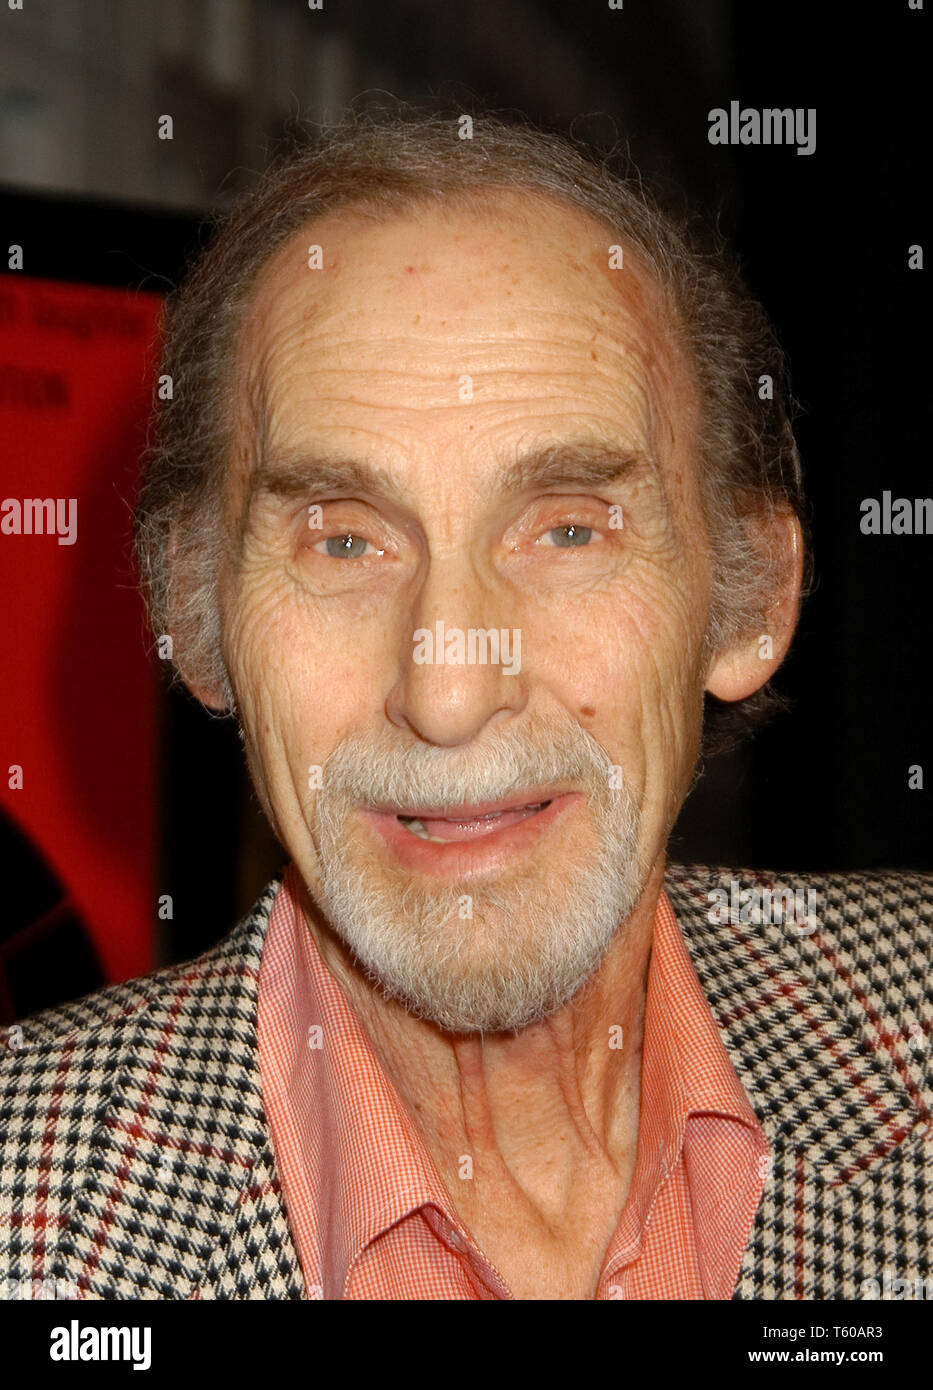 Sid Caesar at the 40th Anniversary of Stanley Kramer's 'It's A Mad, Mad, Mad Mad World' and 40th Anniversary of Arclight Hollywood's Cinerama Dome  at the Arclight Hollywoods Cinerama Dome Theater in Hollywood, CA. The event took place on Thursday, October 16, 2003. Photo by: SBM / PictureLux  File Reference # 33790 1076SBMPLX Stock Photo